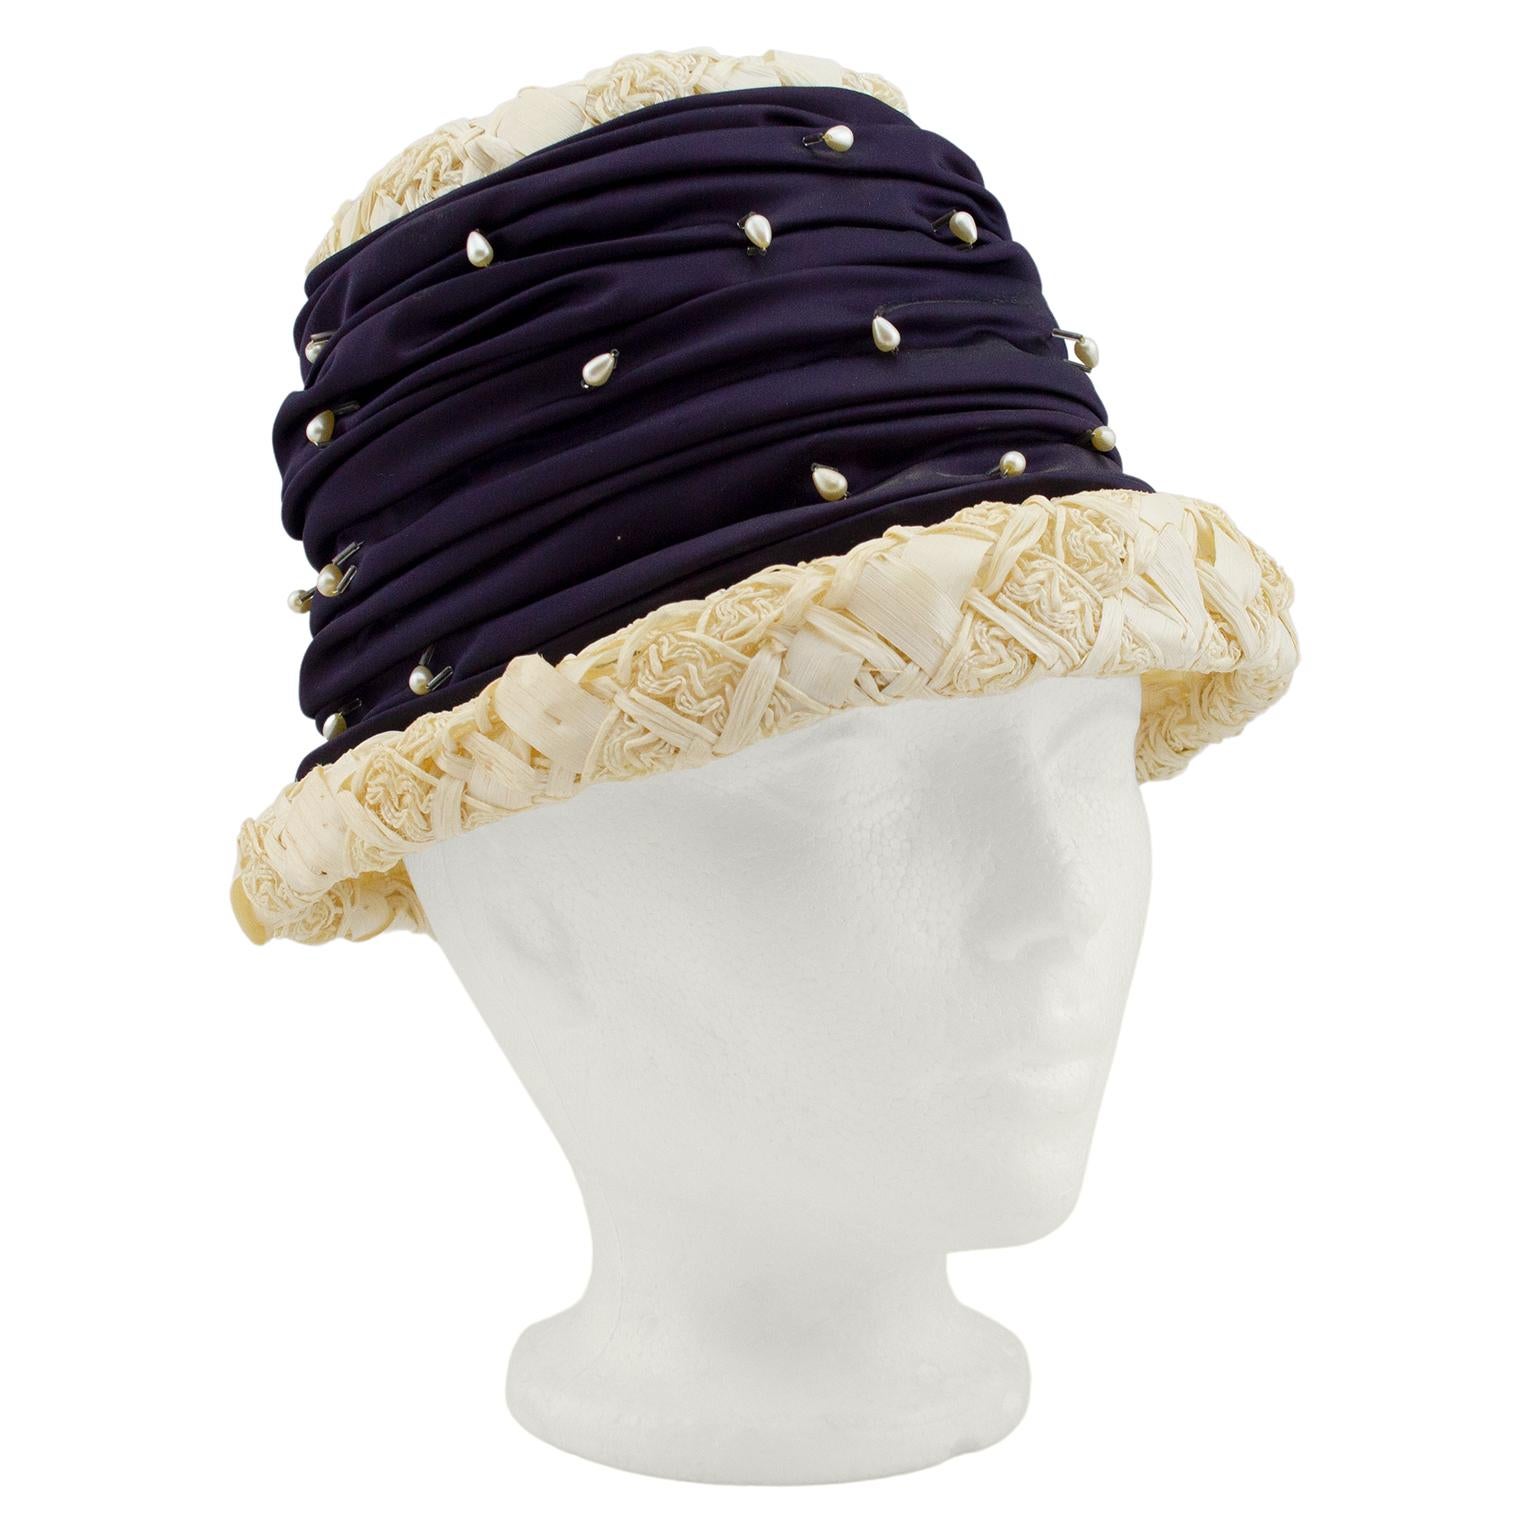 Darling hat from the 1950s. Natural straw with thick large ruched satin band around the crown of the hat, embellished with small teardrop shaped pearls and beads. Small brim. Excellent vintage condition. Average size.